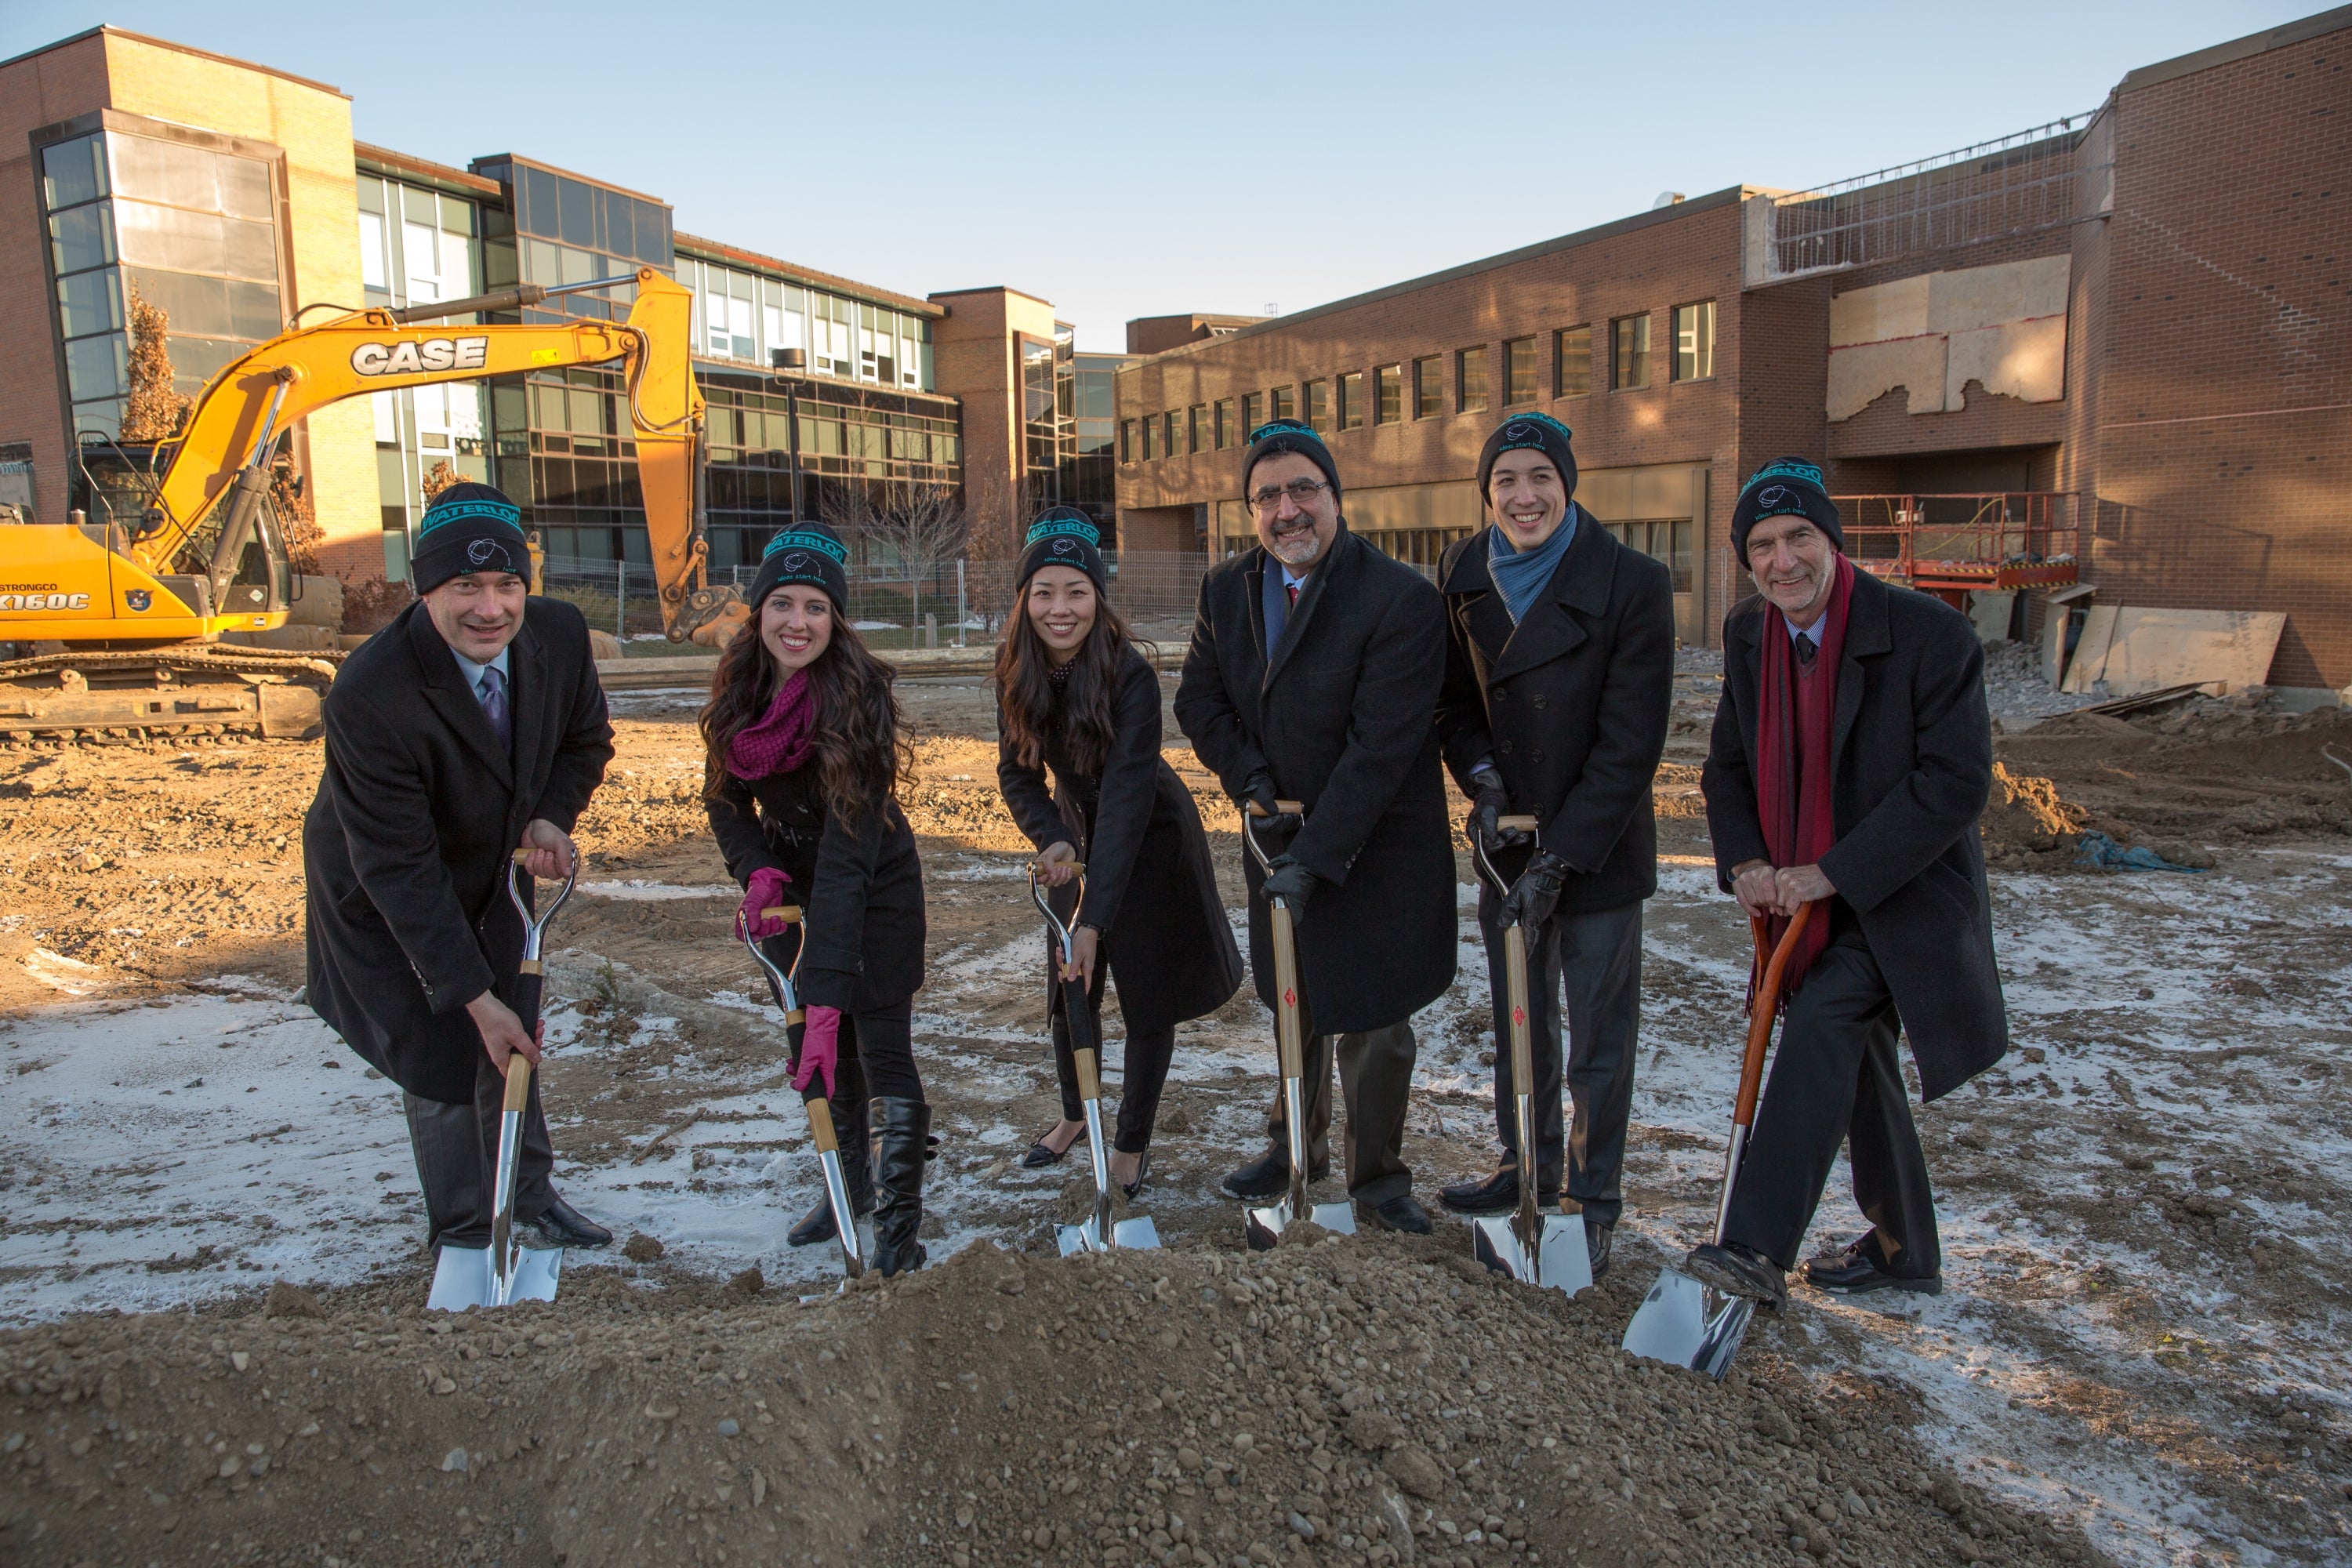 James Rush, Feridun Hamdullahpur, Ian Orchard and student representatives, wearing their AHS toques, with shovels in the ground.